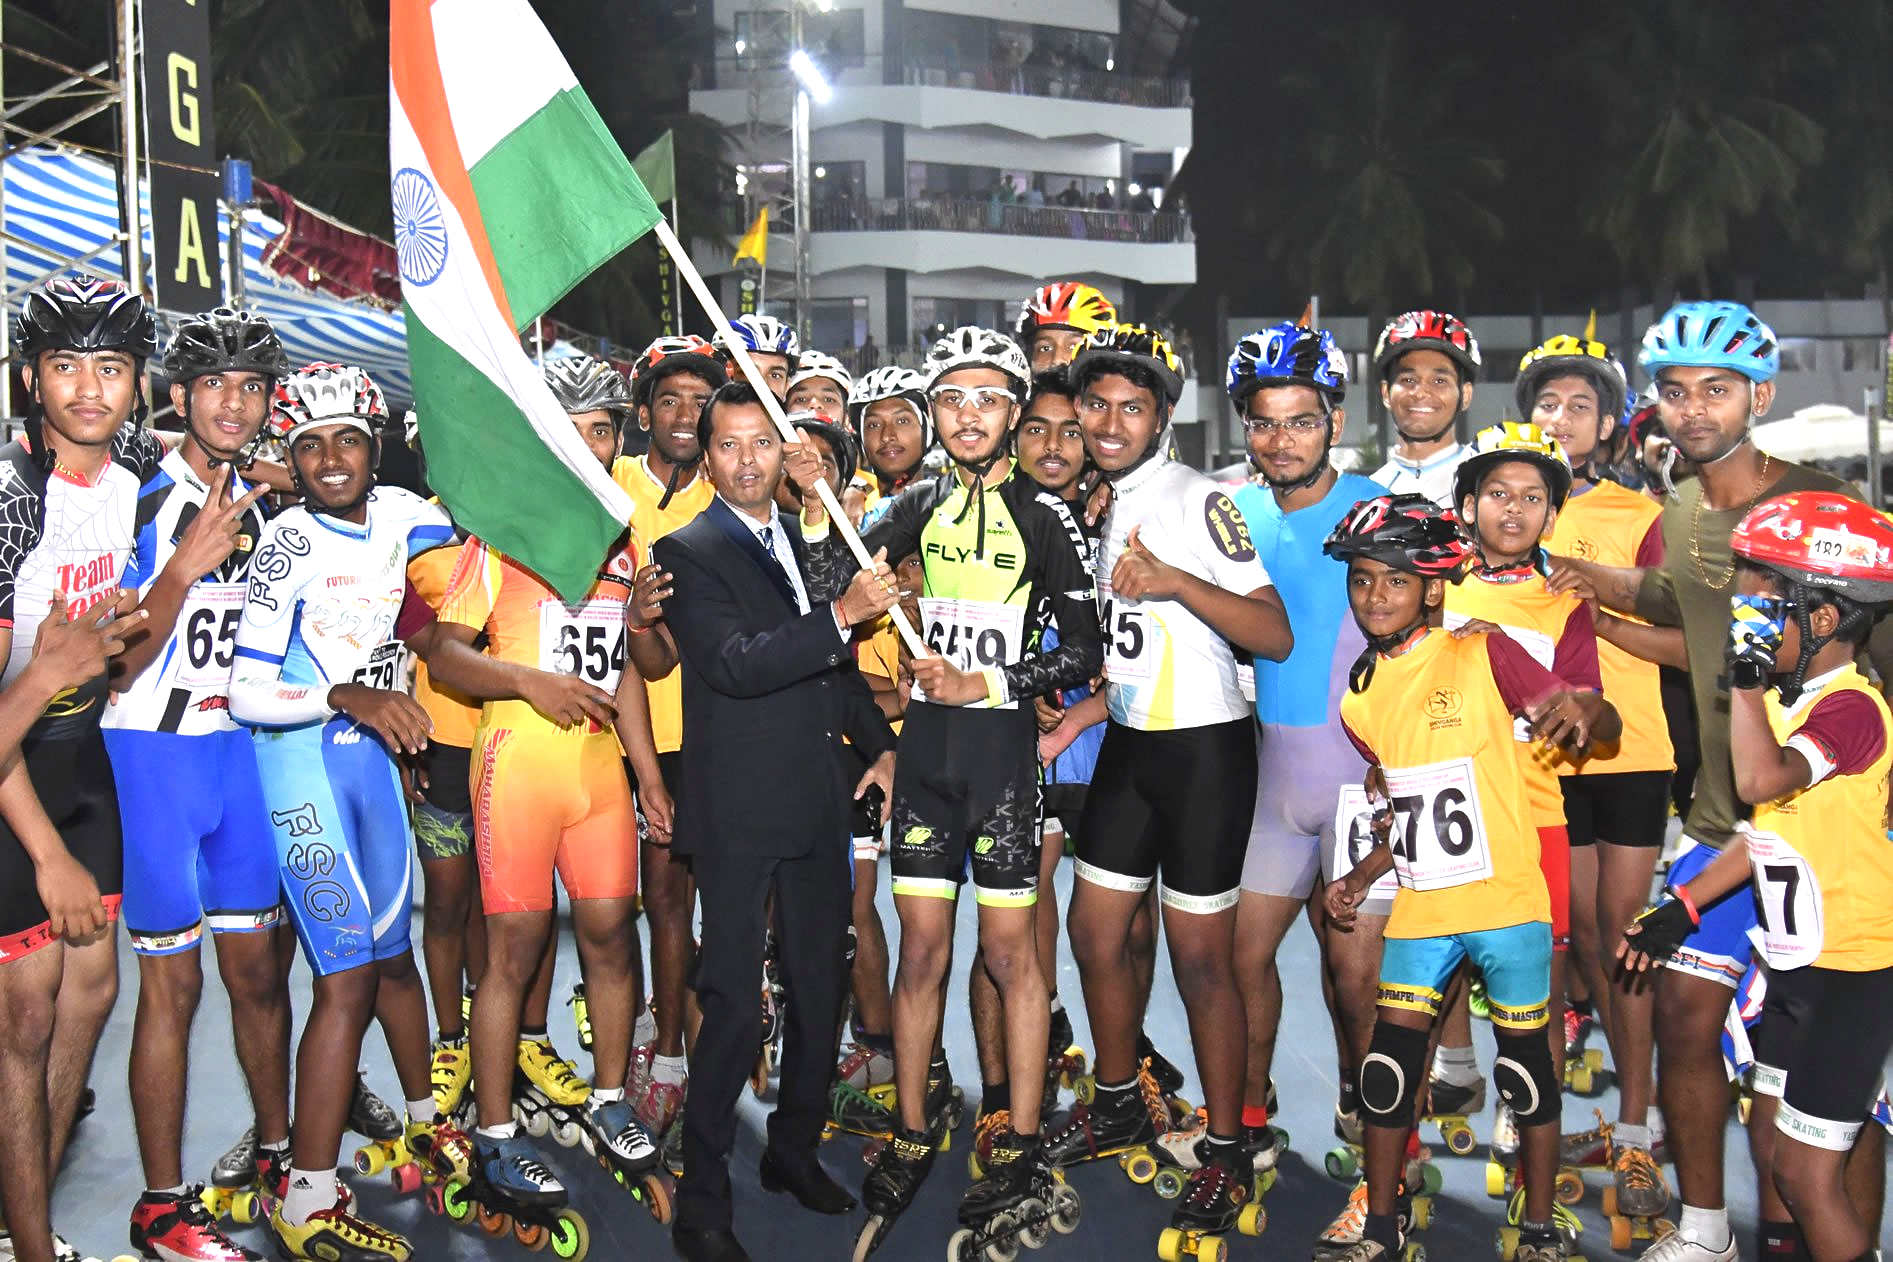 Largest roller skating relay: India sets world record (VIDEO)
